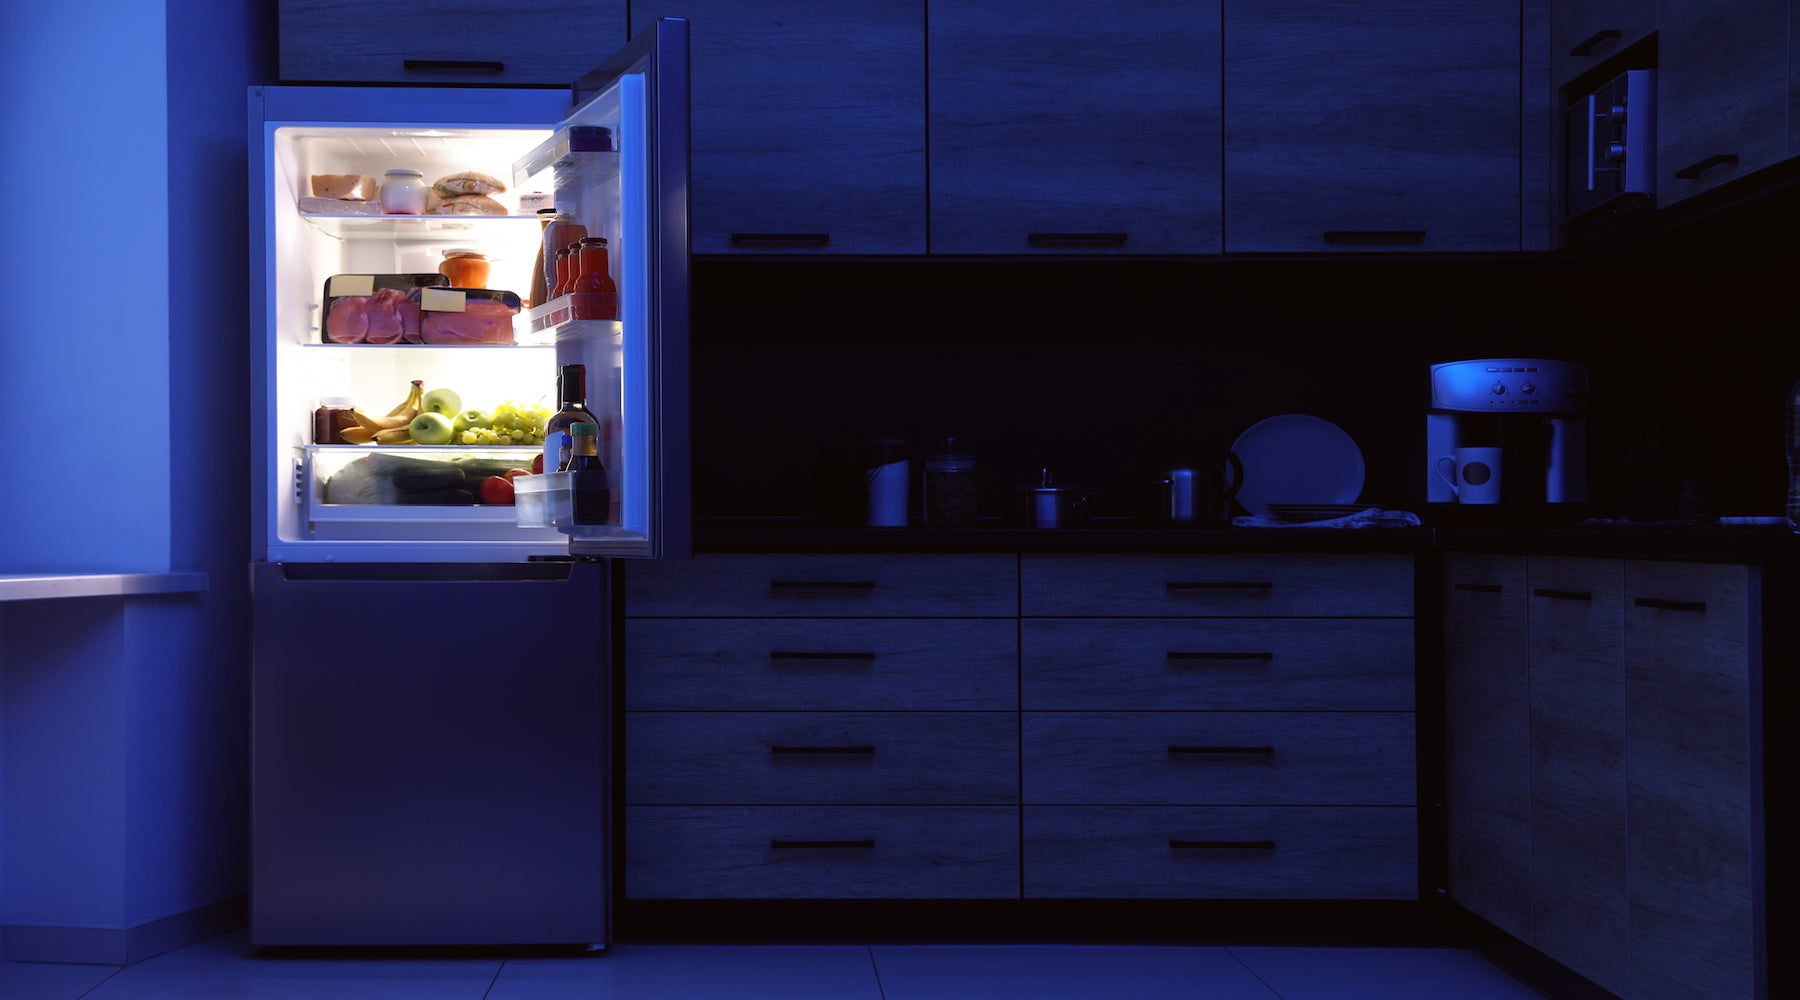 Refrigerator with light bulb on in a dark kitchen